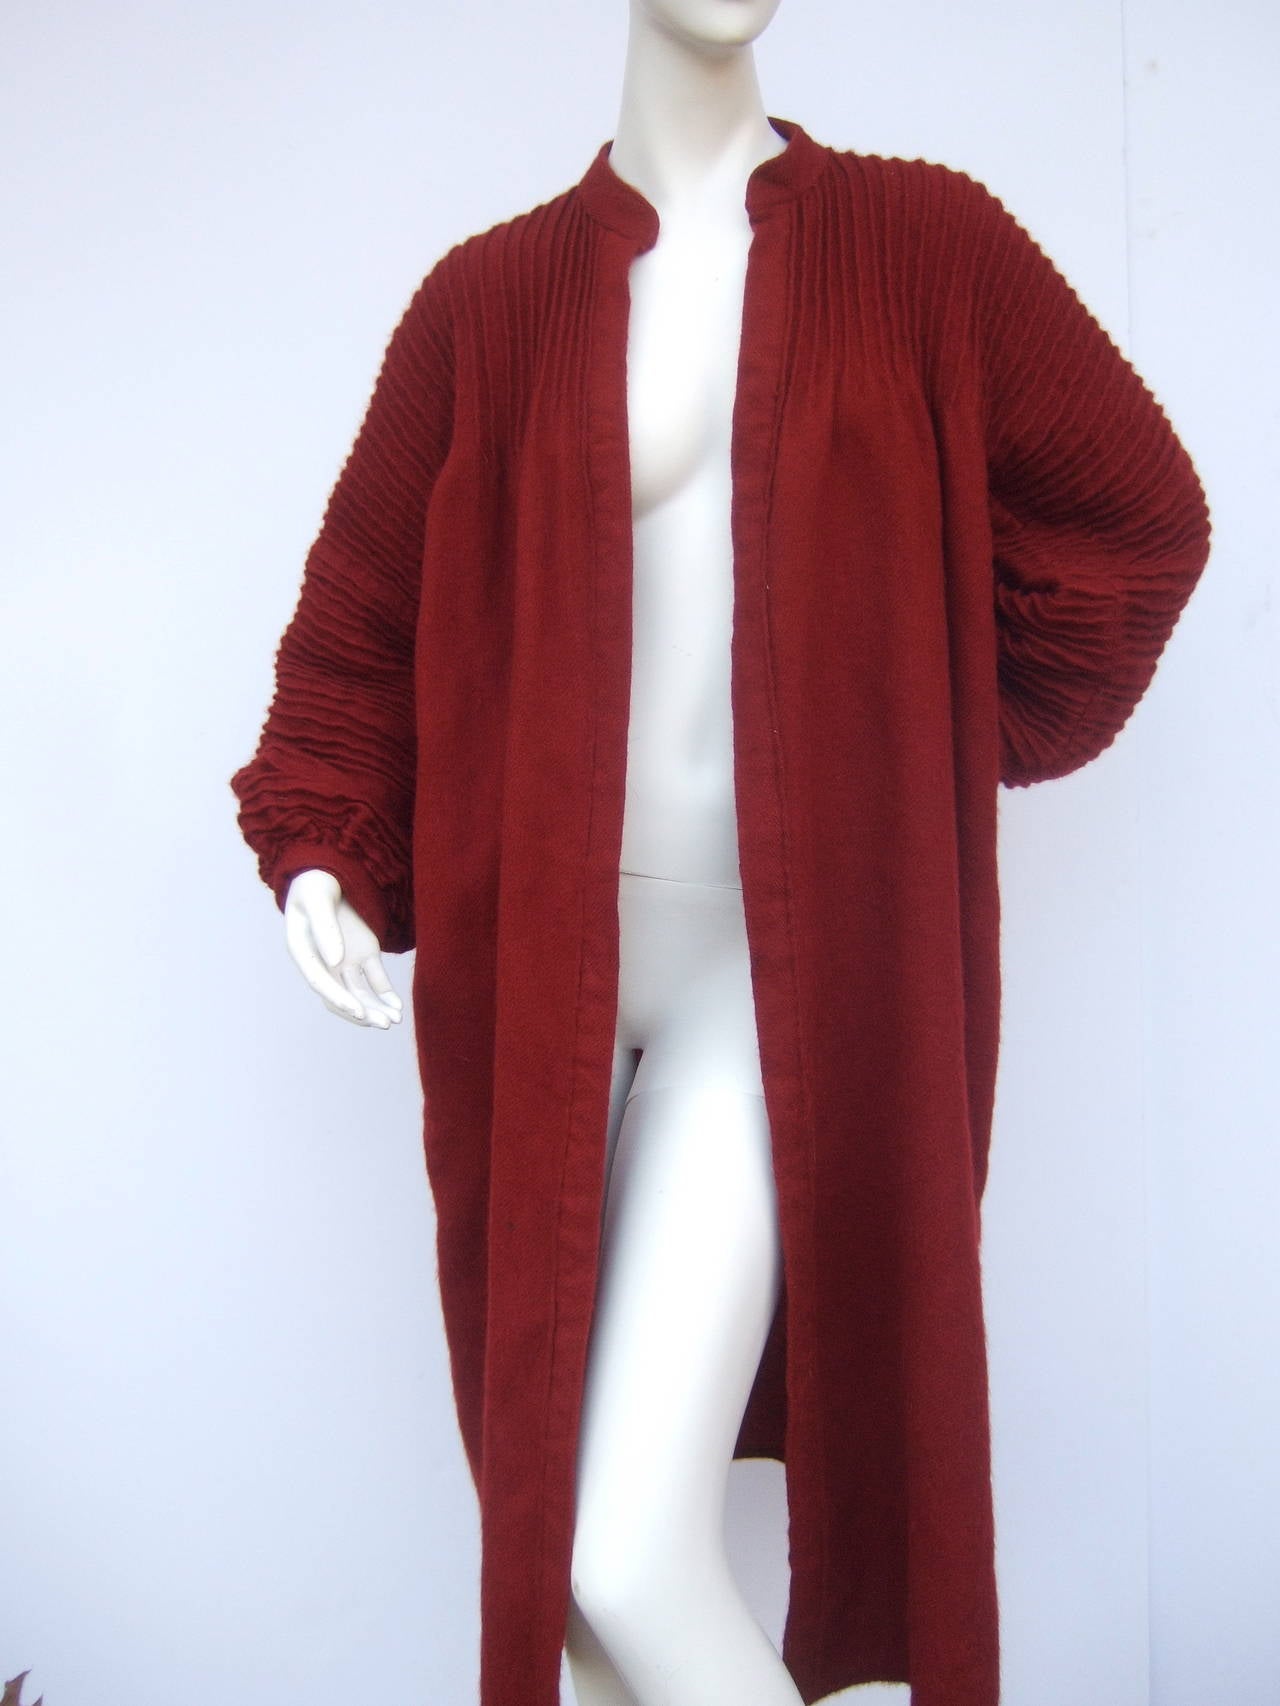 Geoffrey Beene Burgundy wool cocoon coat for Saks Fifth Avenue
The stylish light weight wool coat is designed with unique pleating detail that frames the neckline & runs down the voluminous sleeves

The coat is designed with two hip seam pockets.